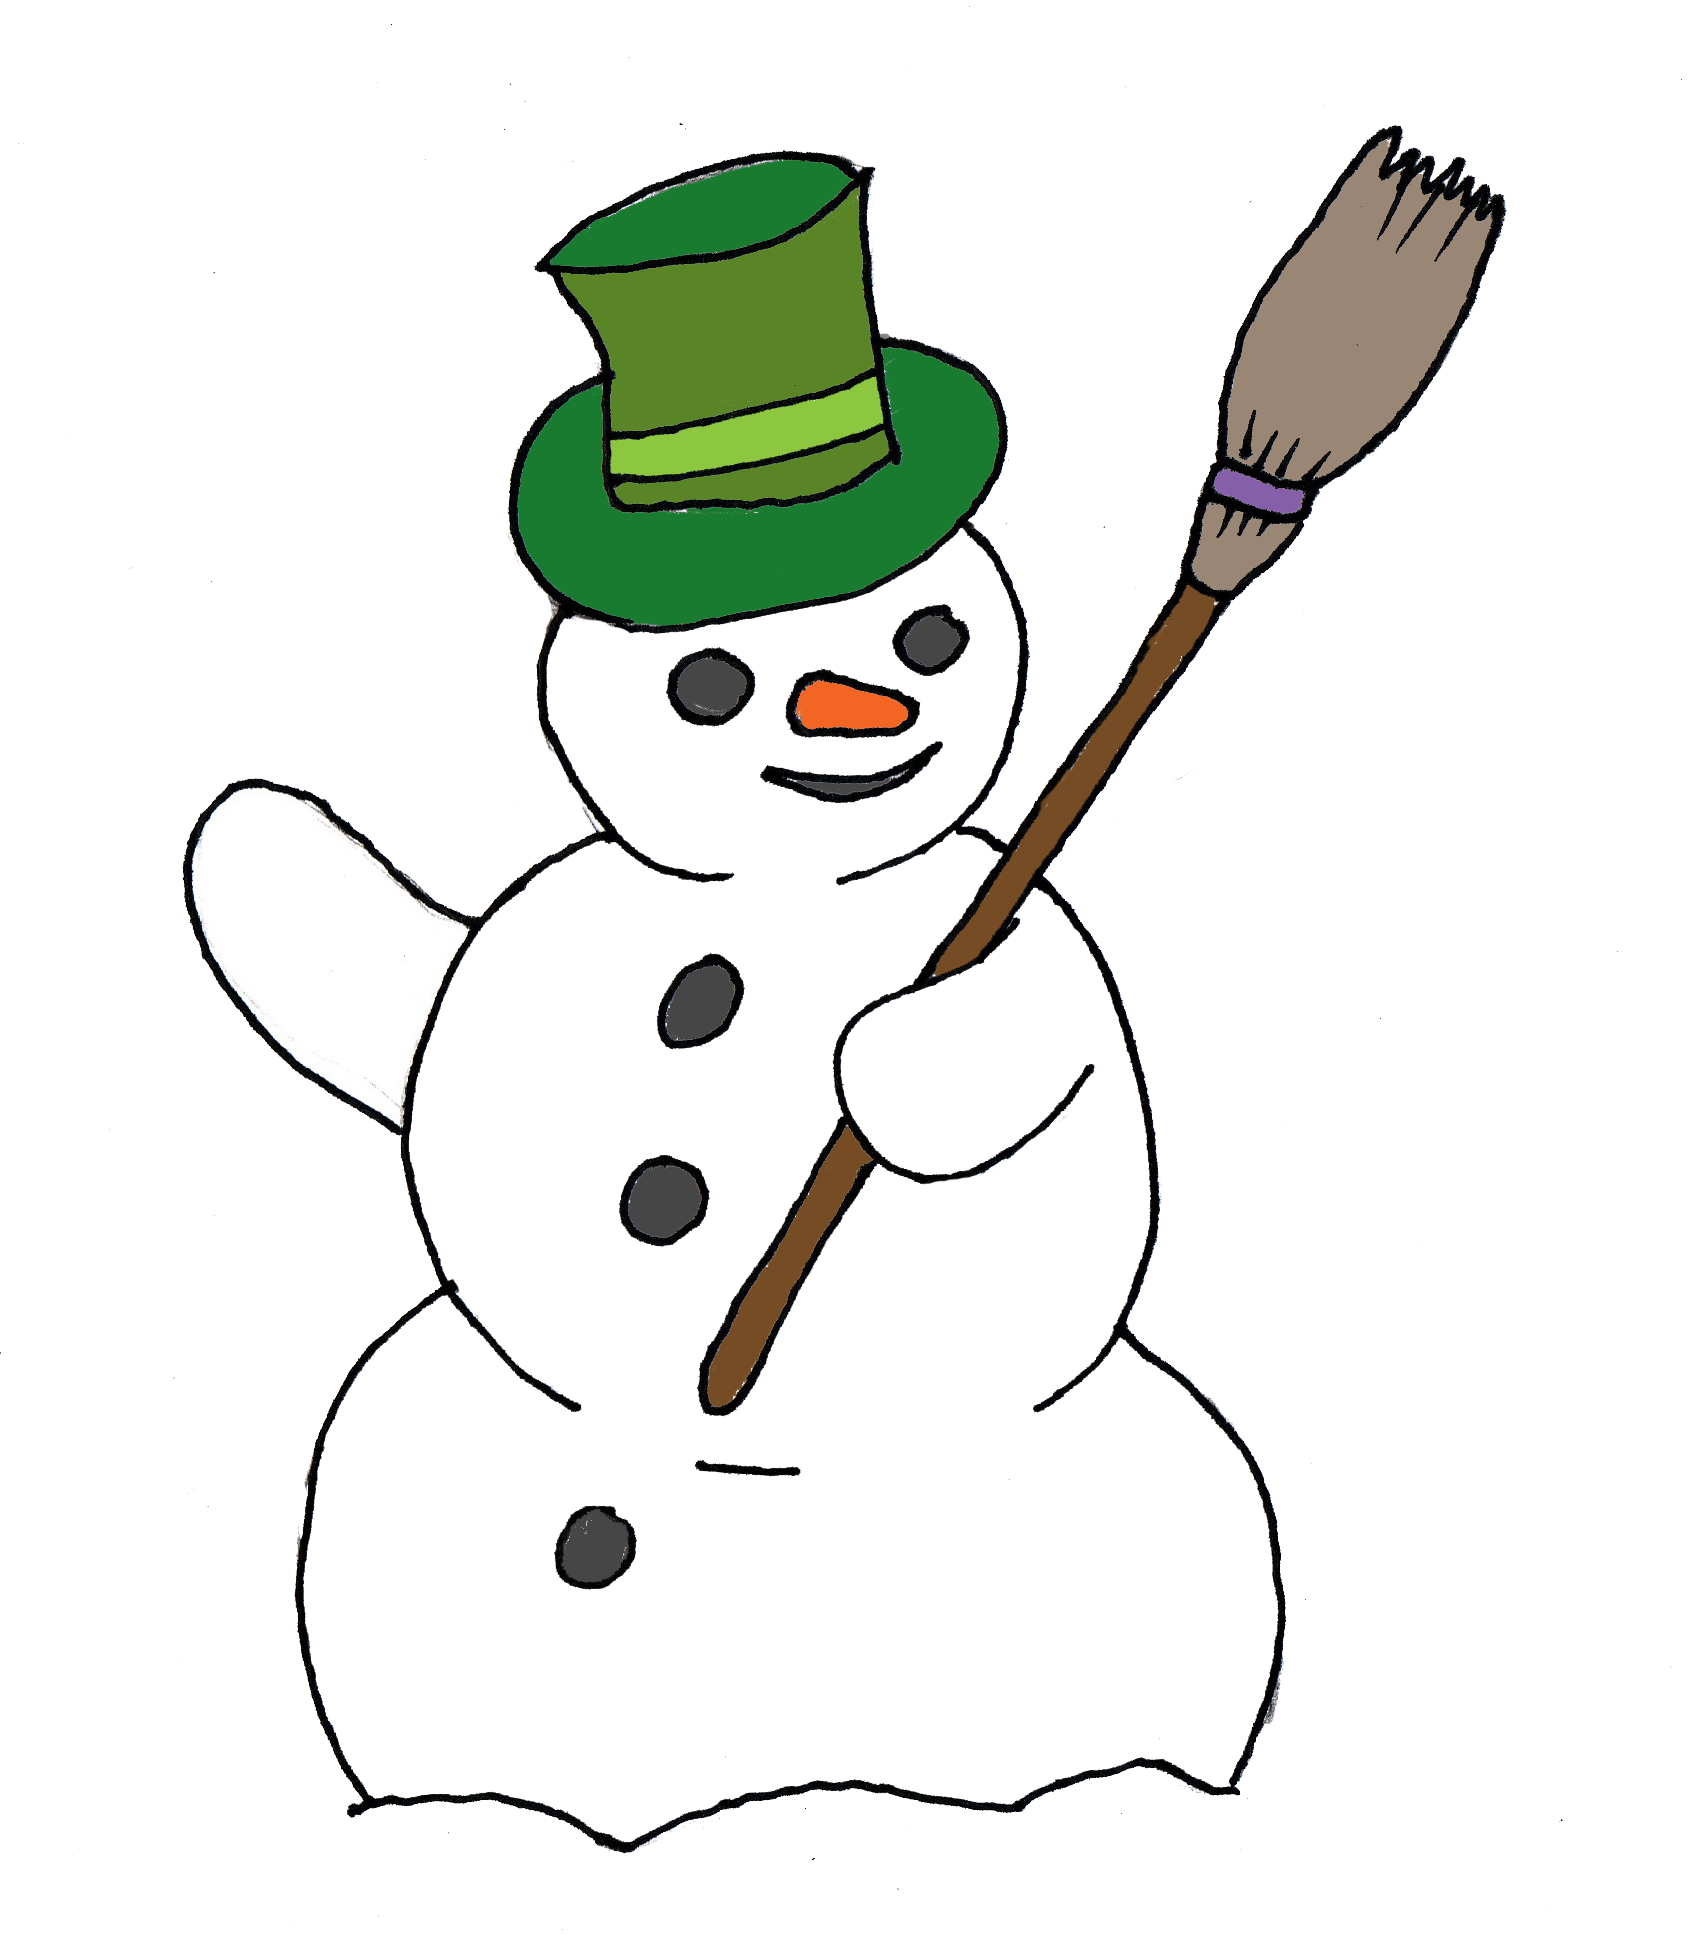 Free To Use   Public Domain Snowman Clip Art   Page 3